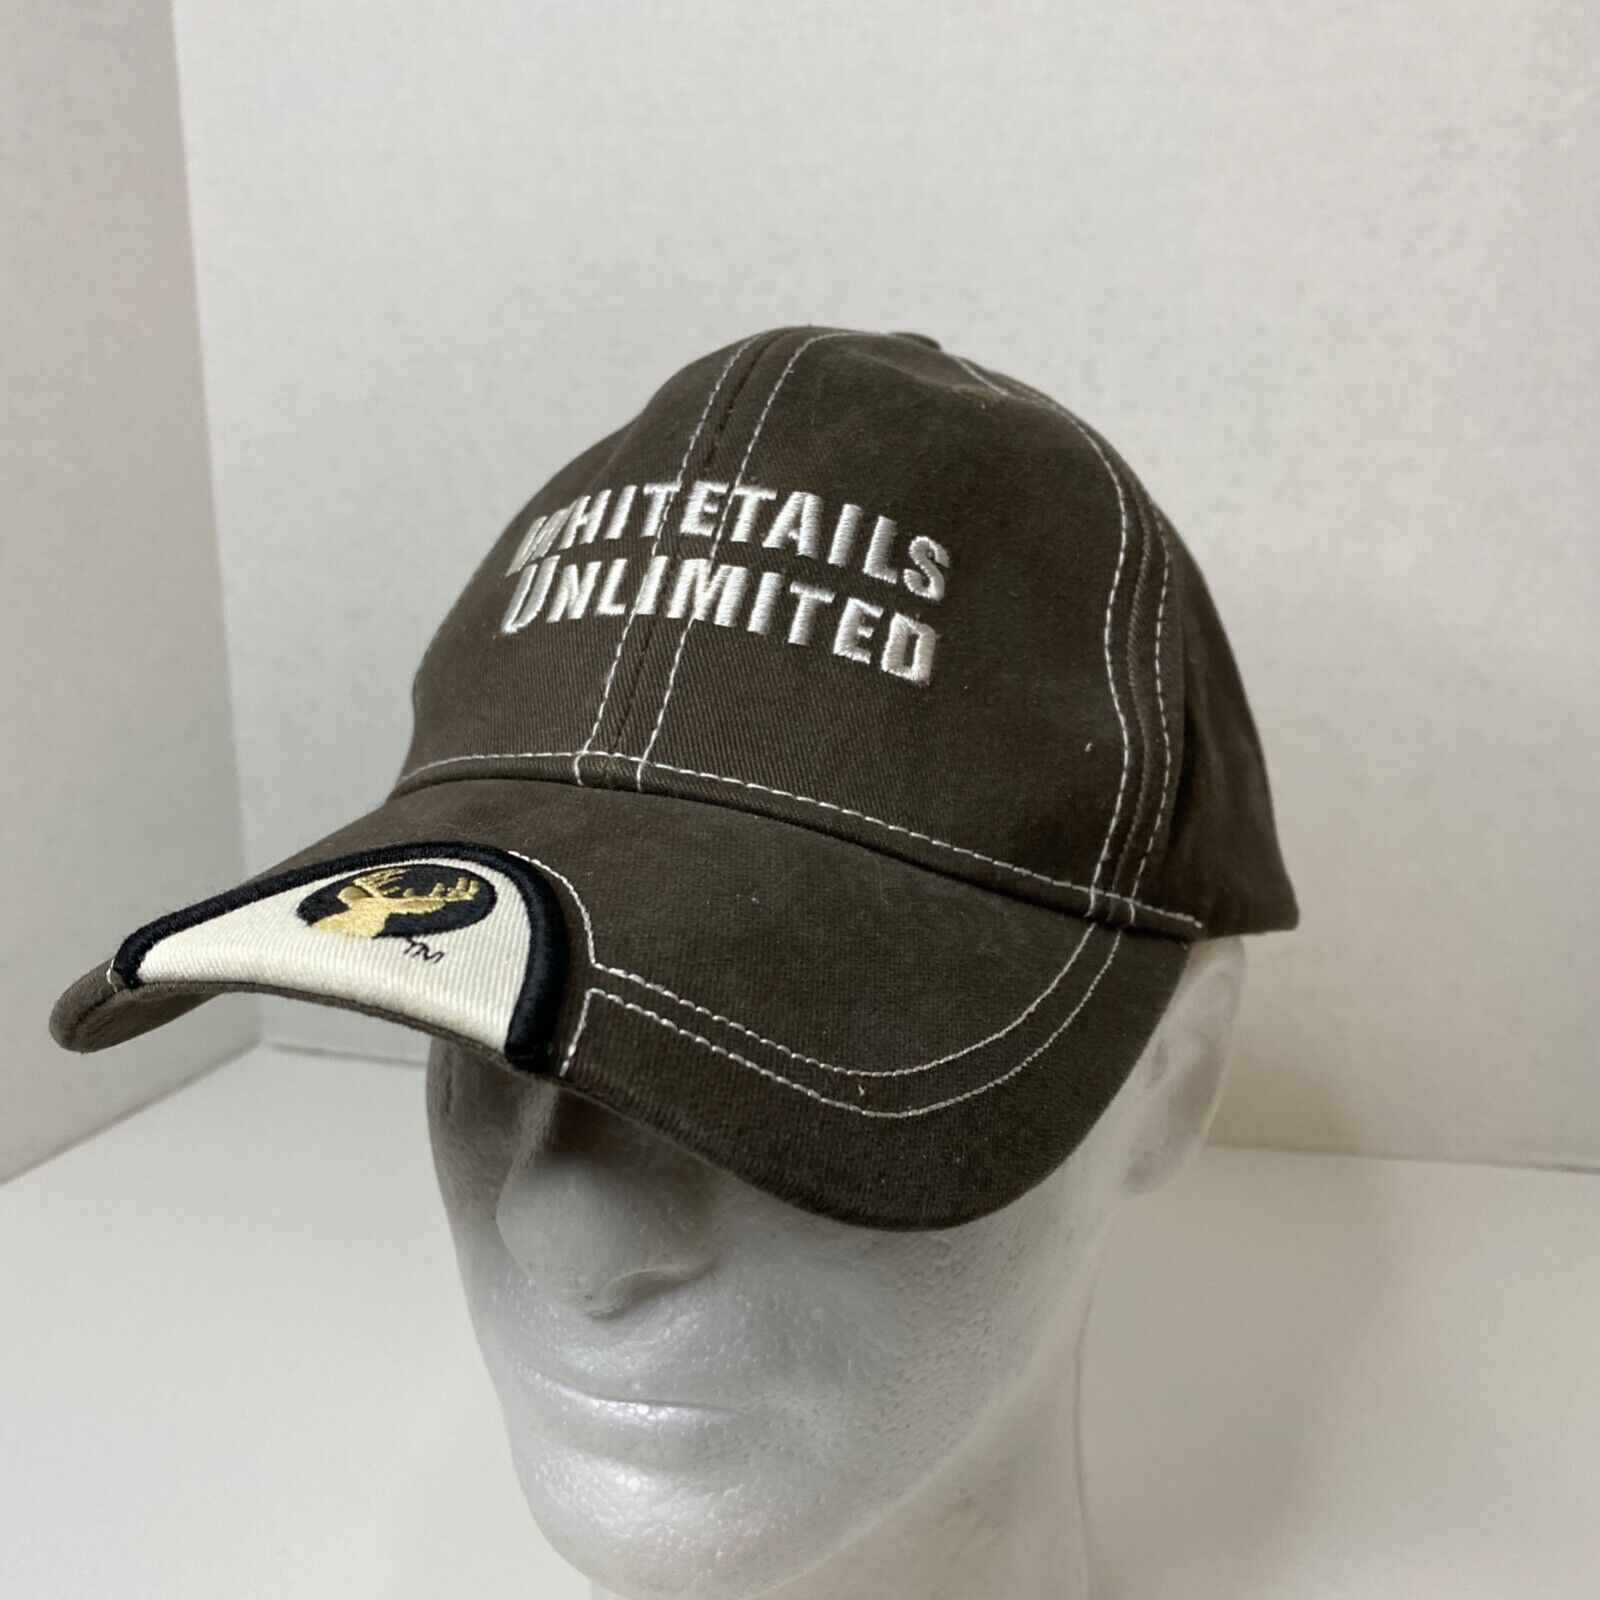 Primary image for Whitetails Unlimited Ball Cap Hat Adjustable Baseball Hunting Outdoors Deer